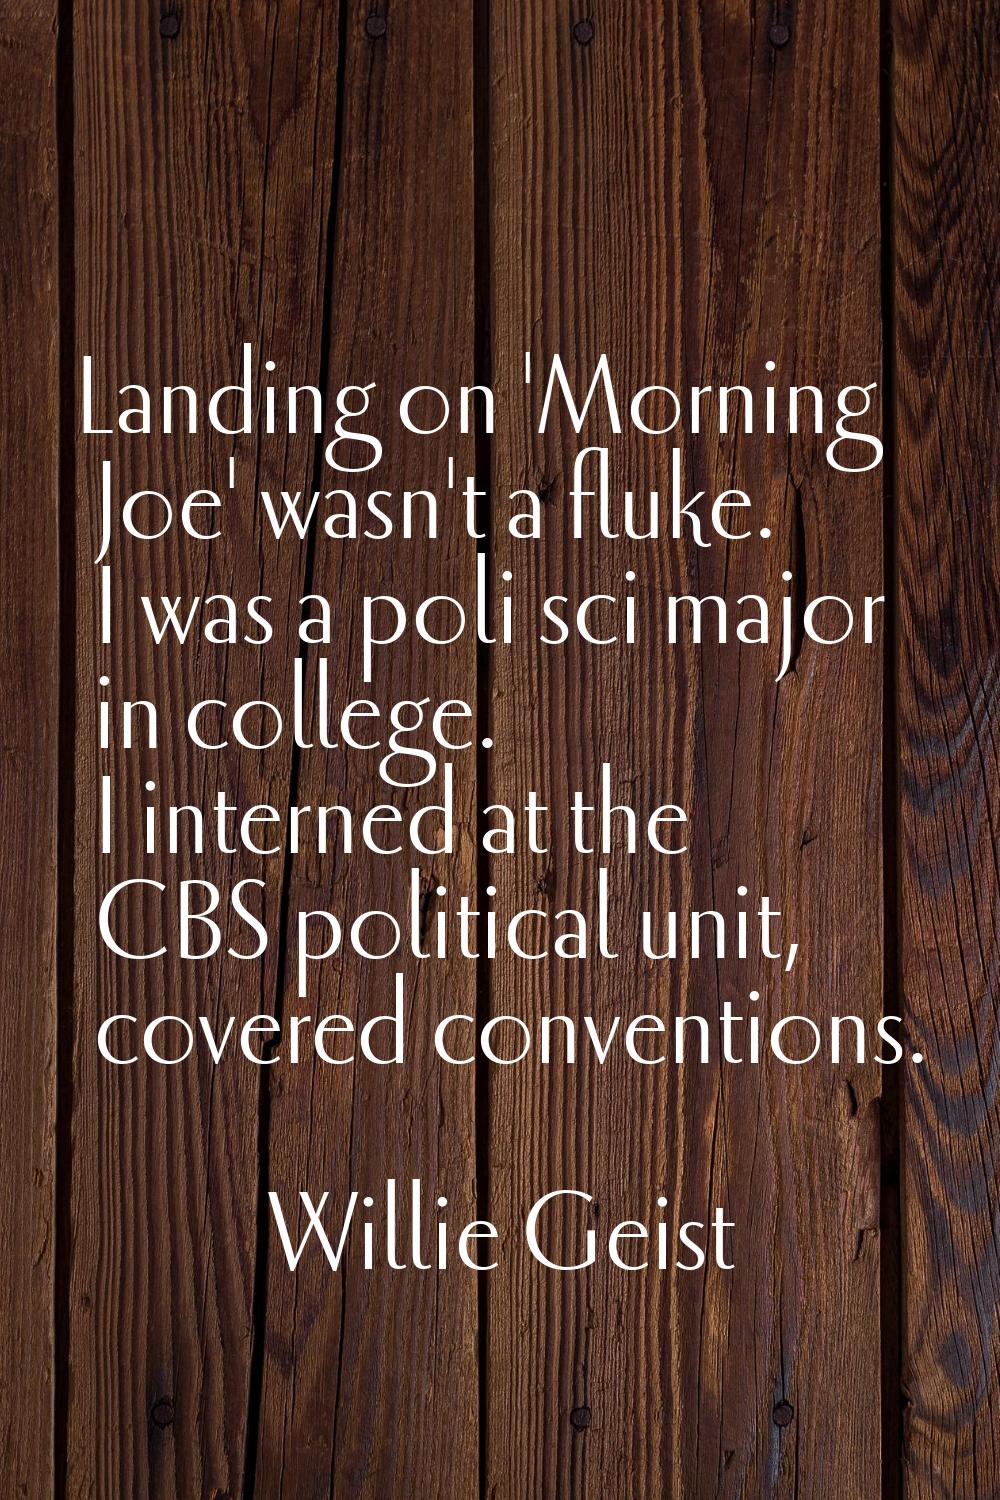 Landing on 'Morning Joe' wasn't a fluke. I was a poli sci major in college. I interned at the CBS p